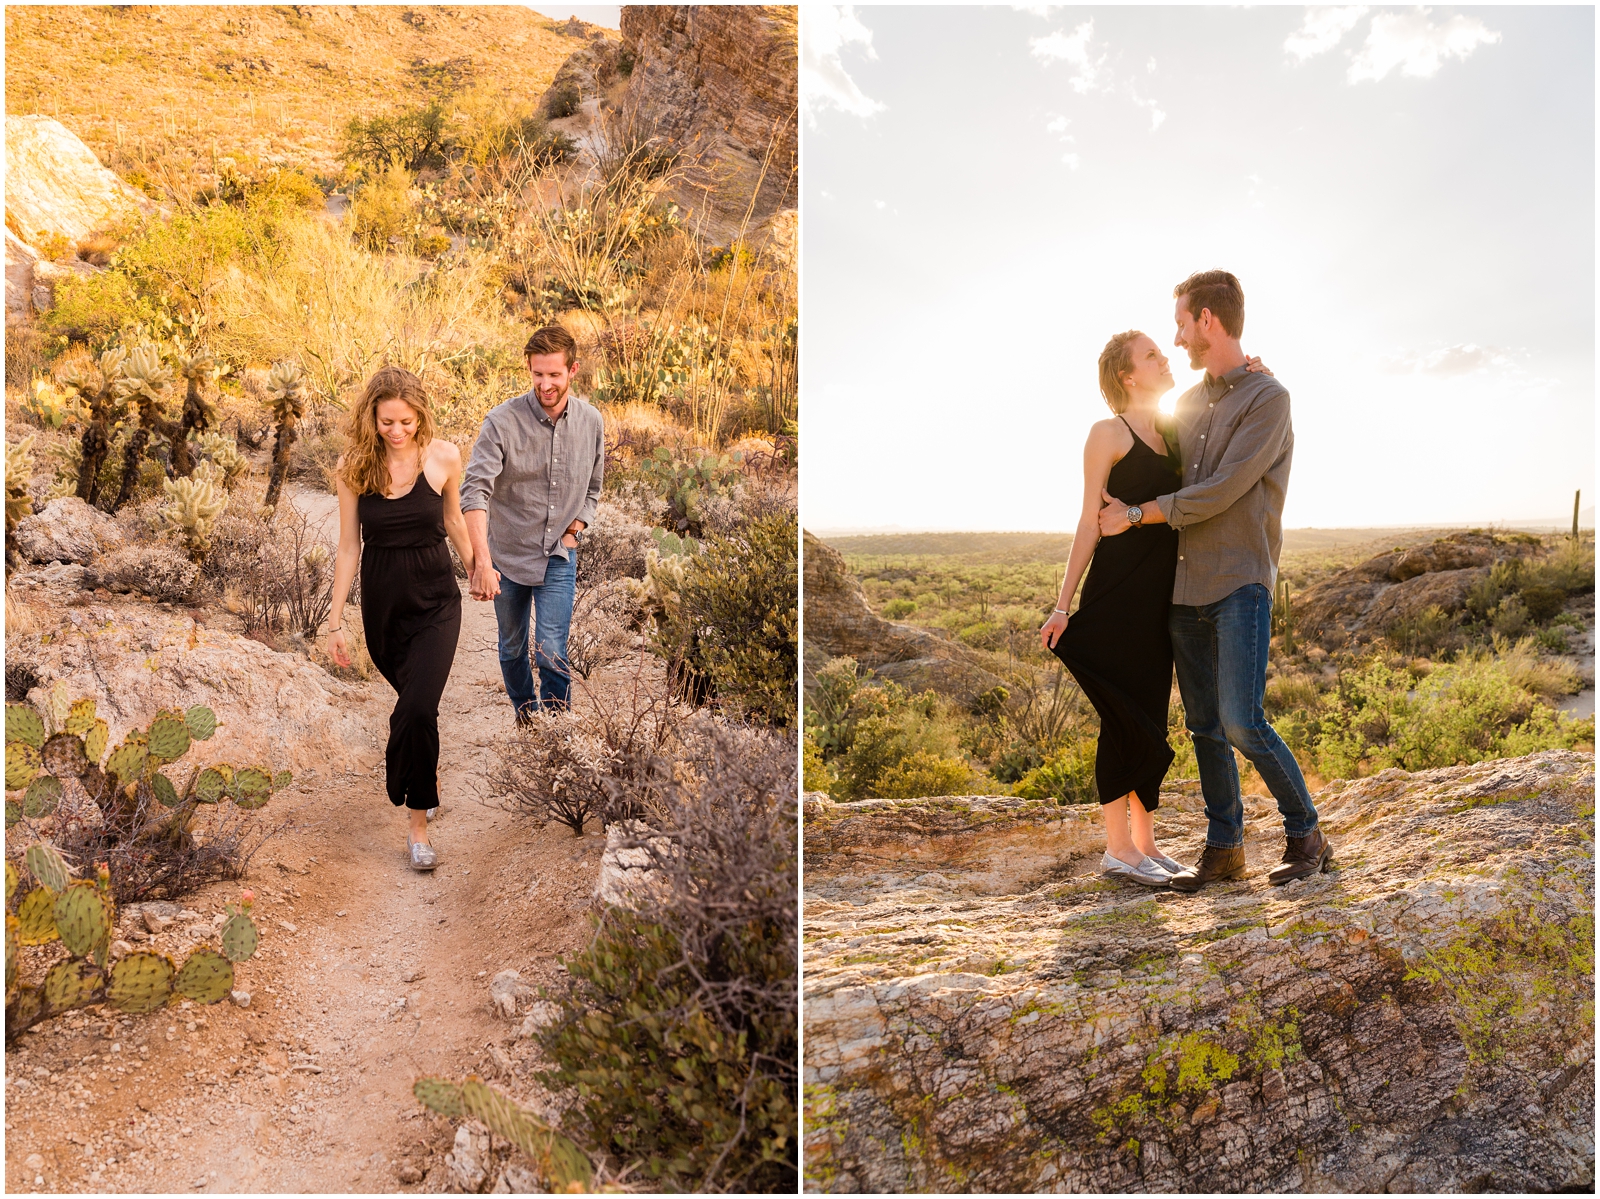 Hiking during your Arizona adventure session is so much fun! This couple even hiked on trails lined with cacti to explore the area! | Clarissa Wylde Photography